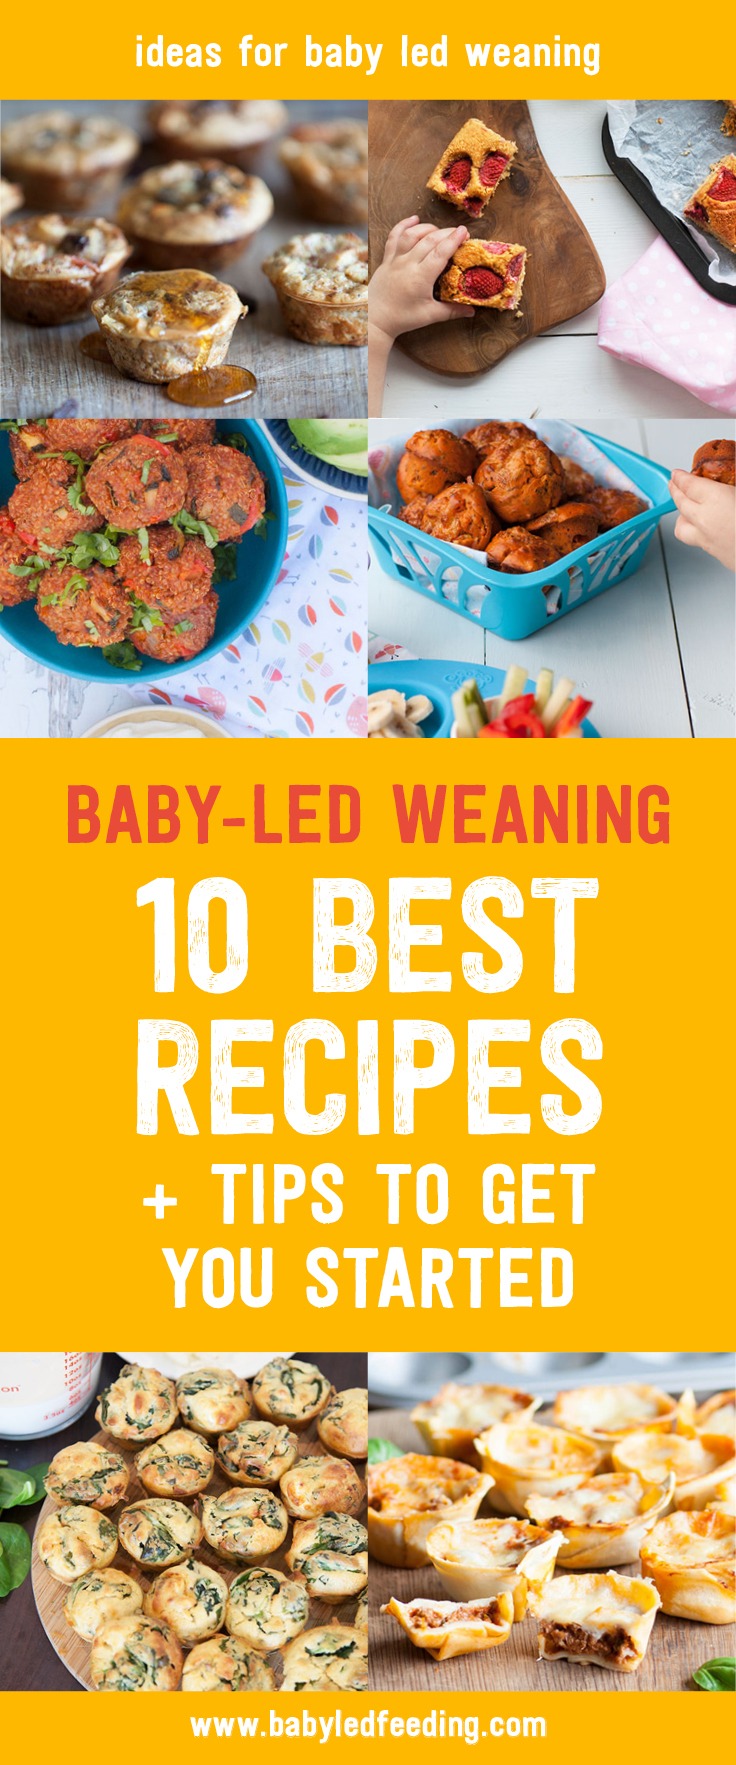 How do I start baby led weaning? Here are 10 tips and healthy baby led weaning recipe to start your baby on finger foods. Easy recipe that are refined sugar free, low in salt, and loaded with whole grains, vegetables, and fruit. Make ahead and freeze several of these nutritious recipe for a quick baby friendly meal! #babyledweaning #fingerfood #fingerfoodrecipe #firstfoods #babyfood #startingsolids #babyledfeeding